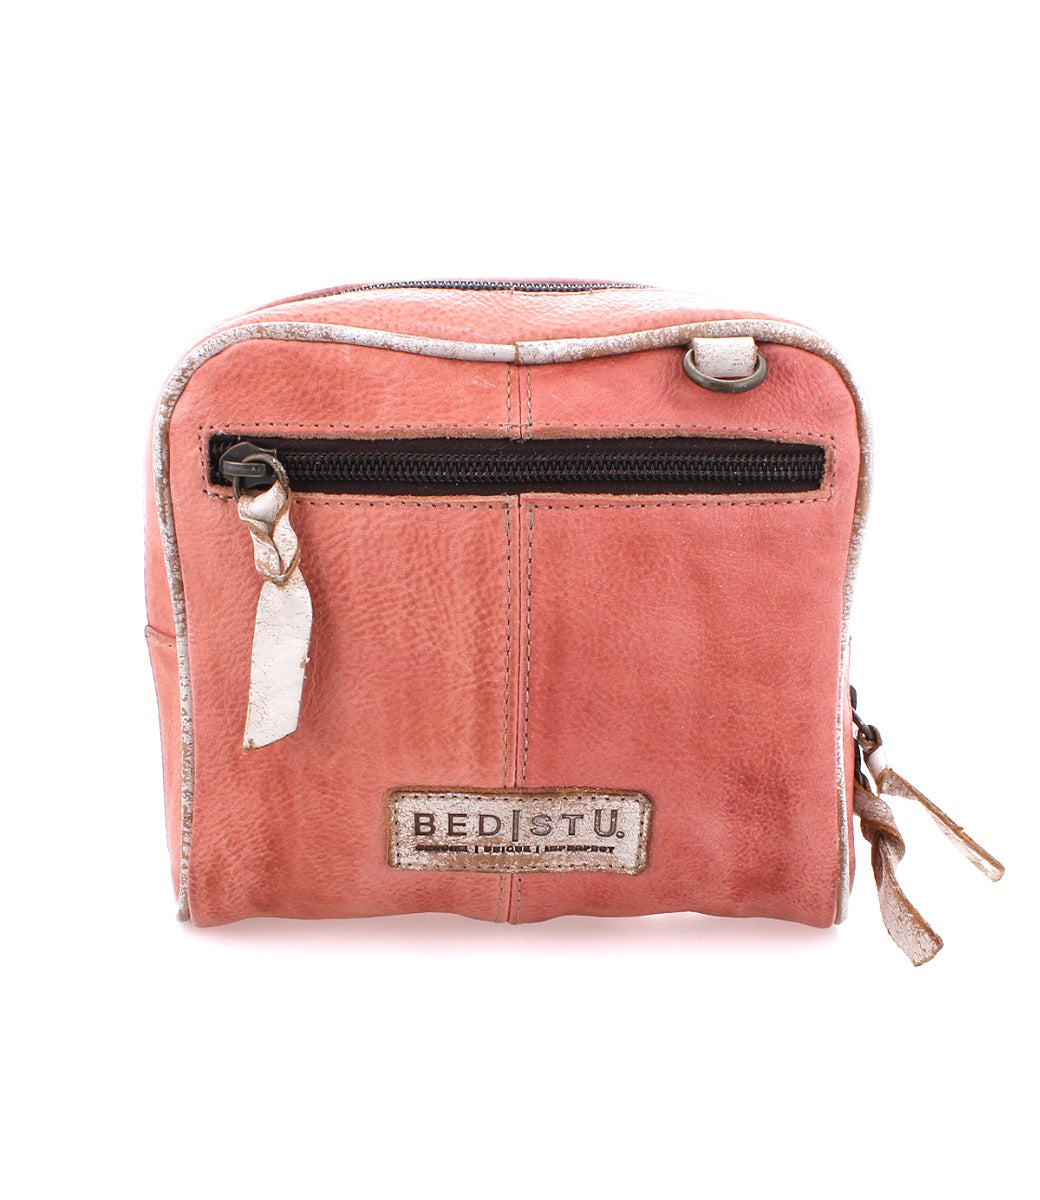 A pink Capture cosmetic bag with a zipper, from the Bed Stu brand.